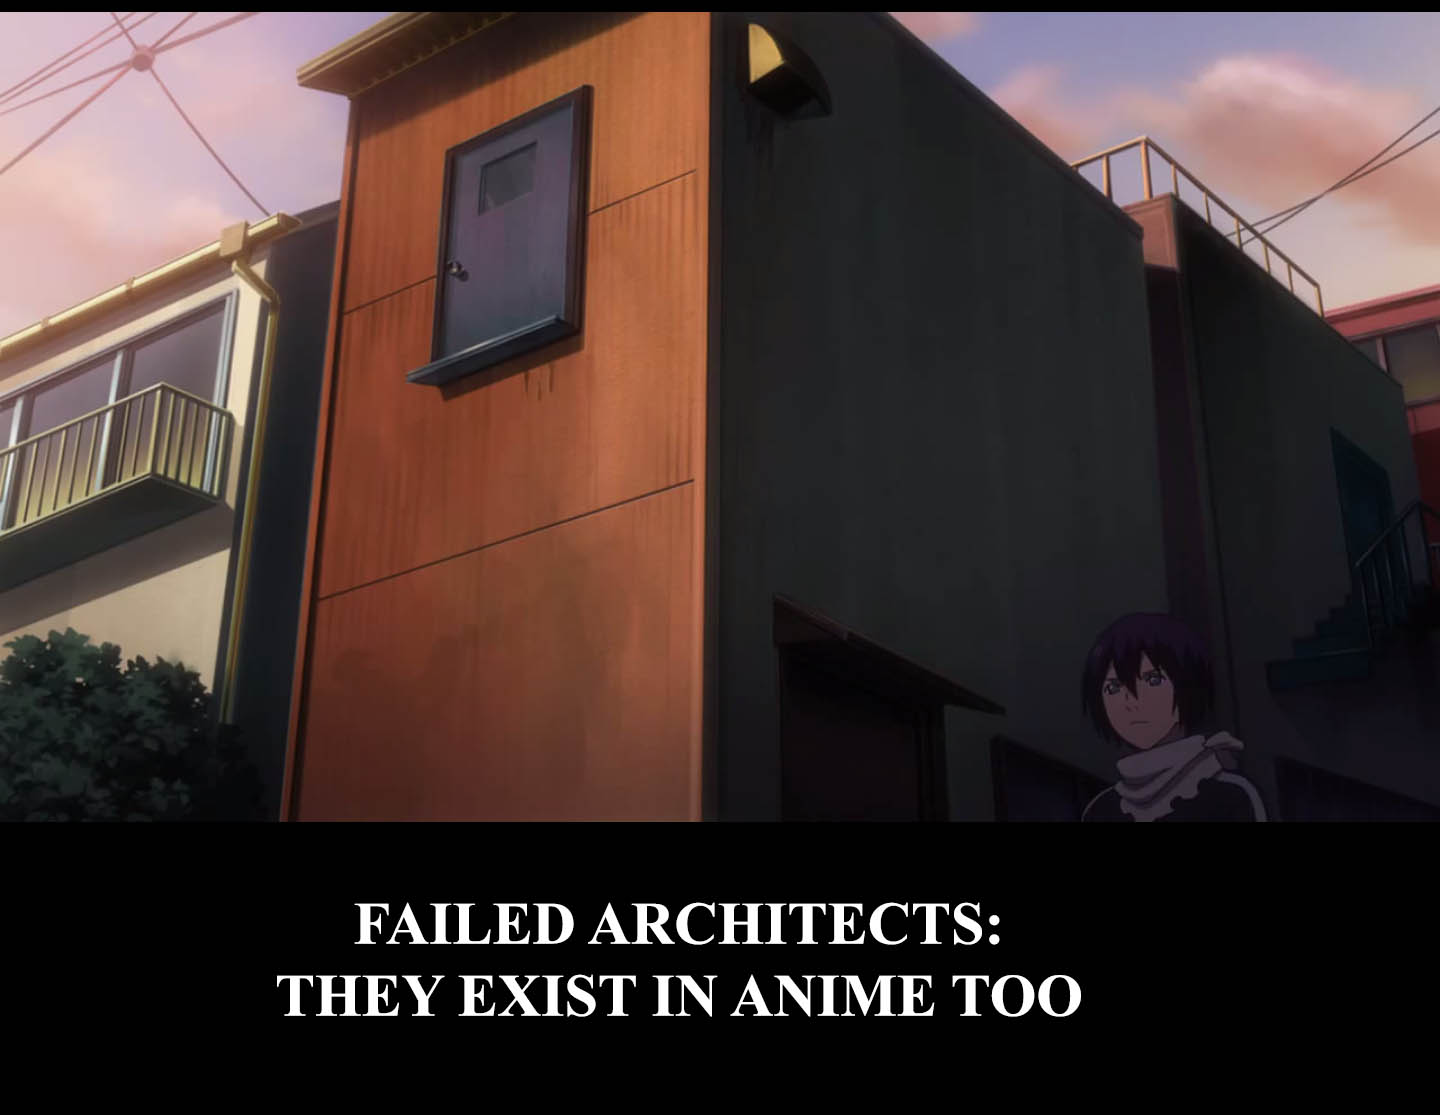 I wonder where they get these architects